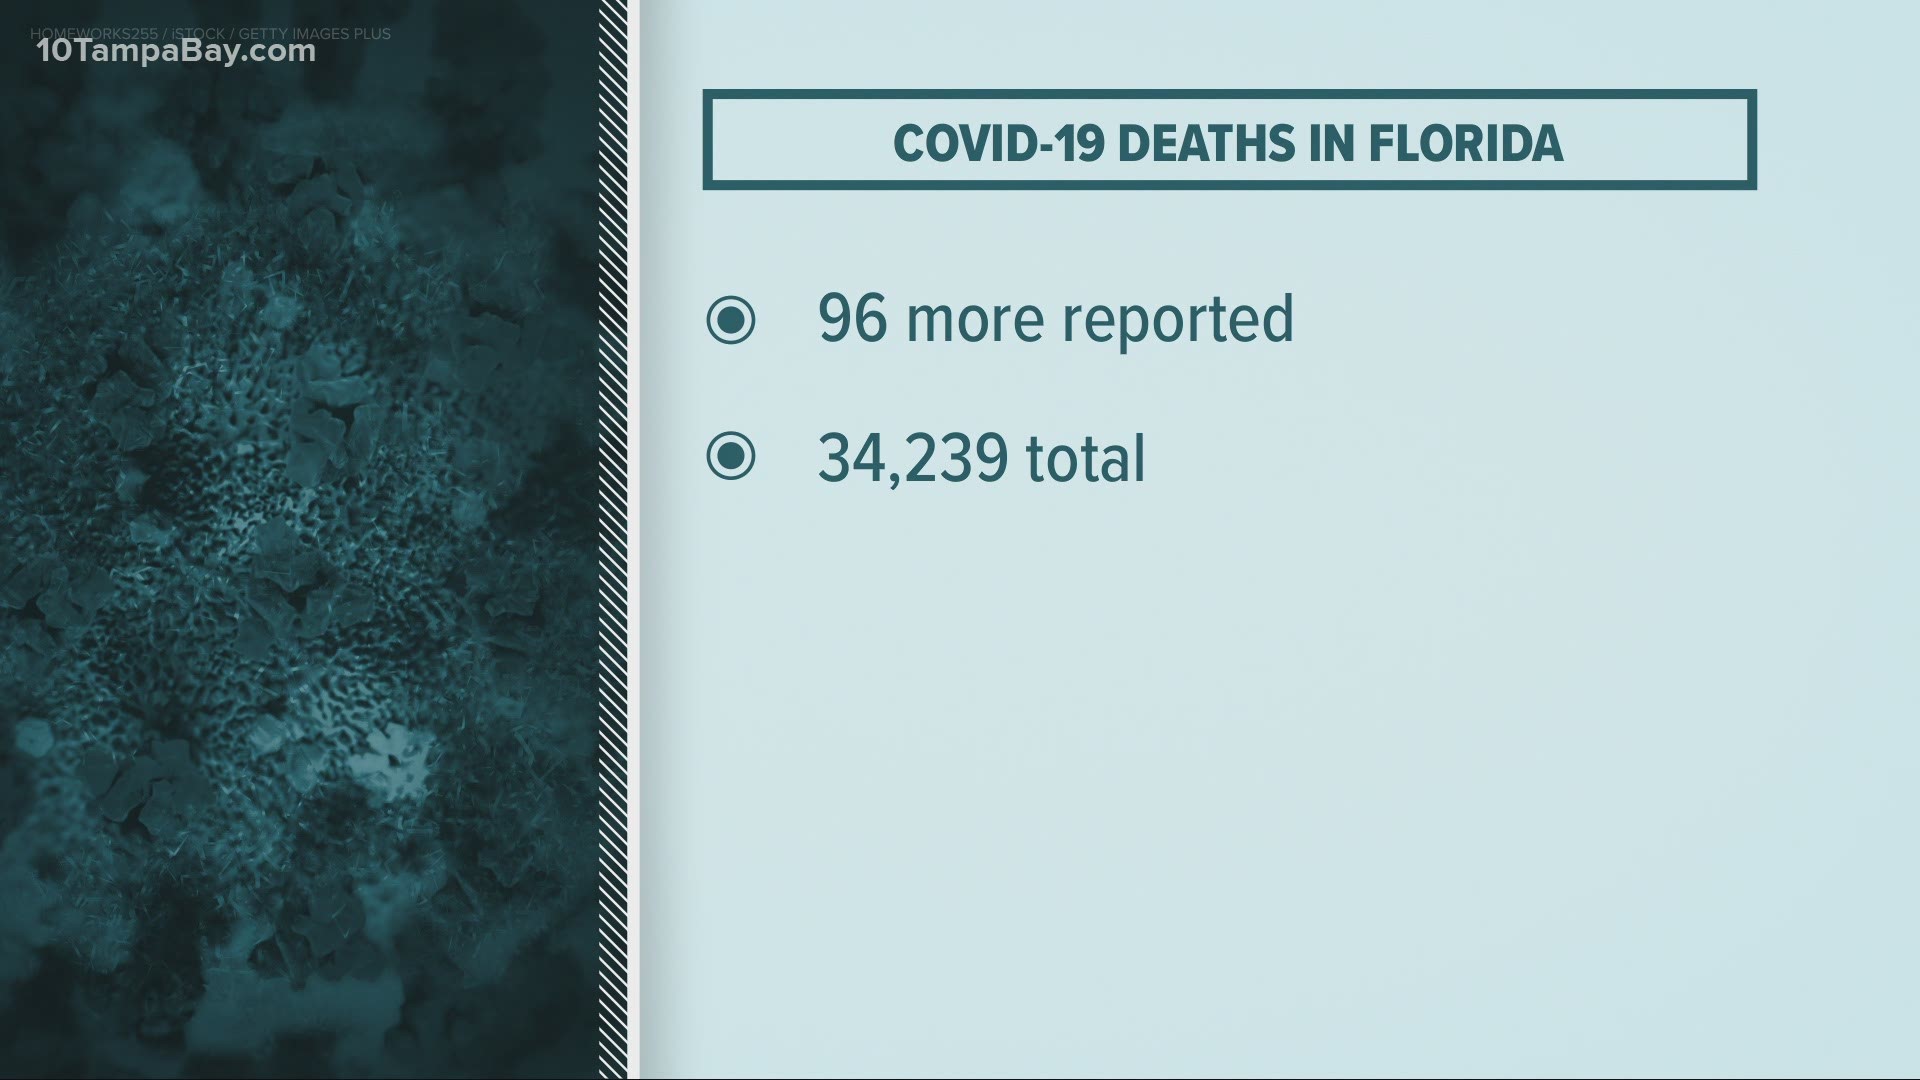 A total of 2,071,015 people in Florida have tested positive for the virus since the pandemic began.